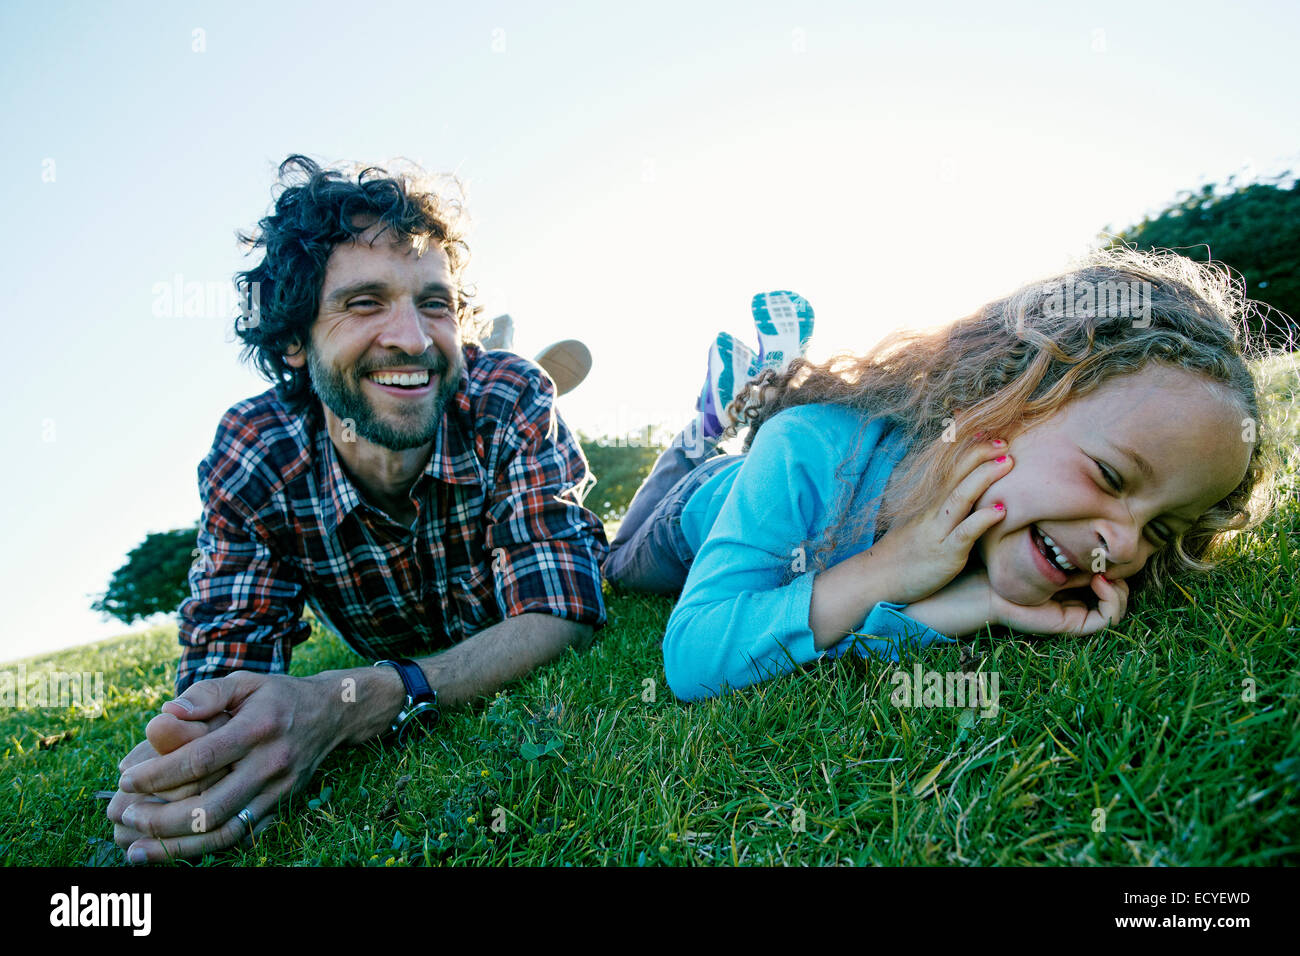 Father and daughter playing in grassy field Stock Photo